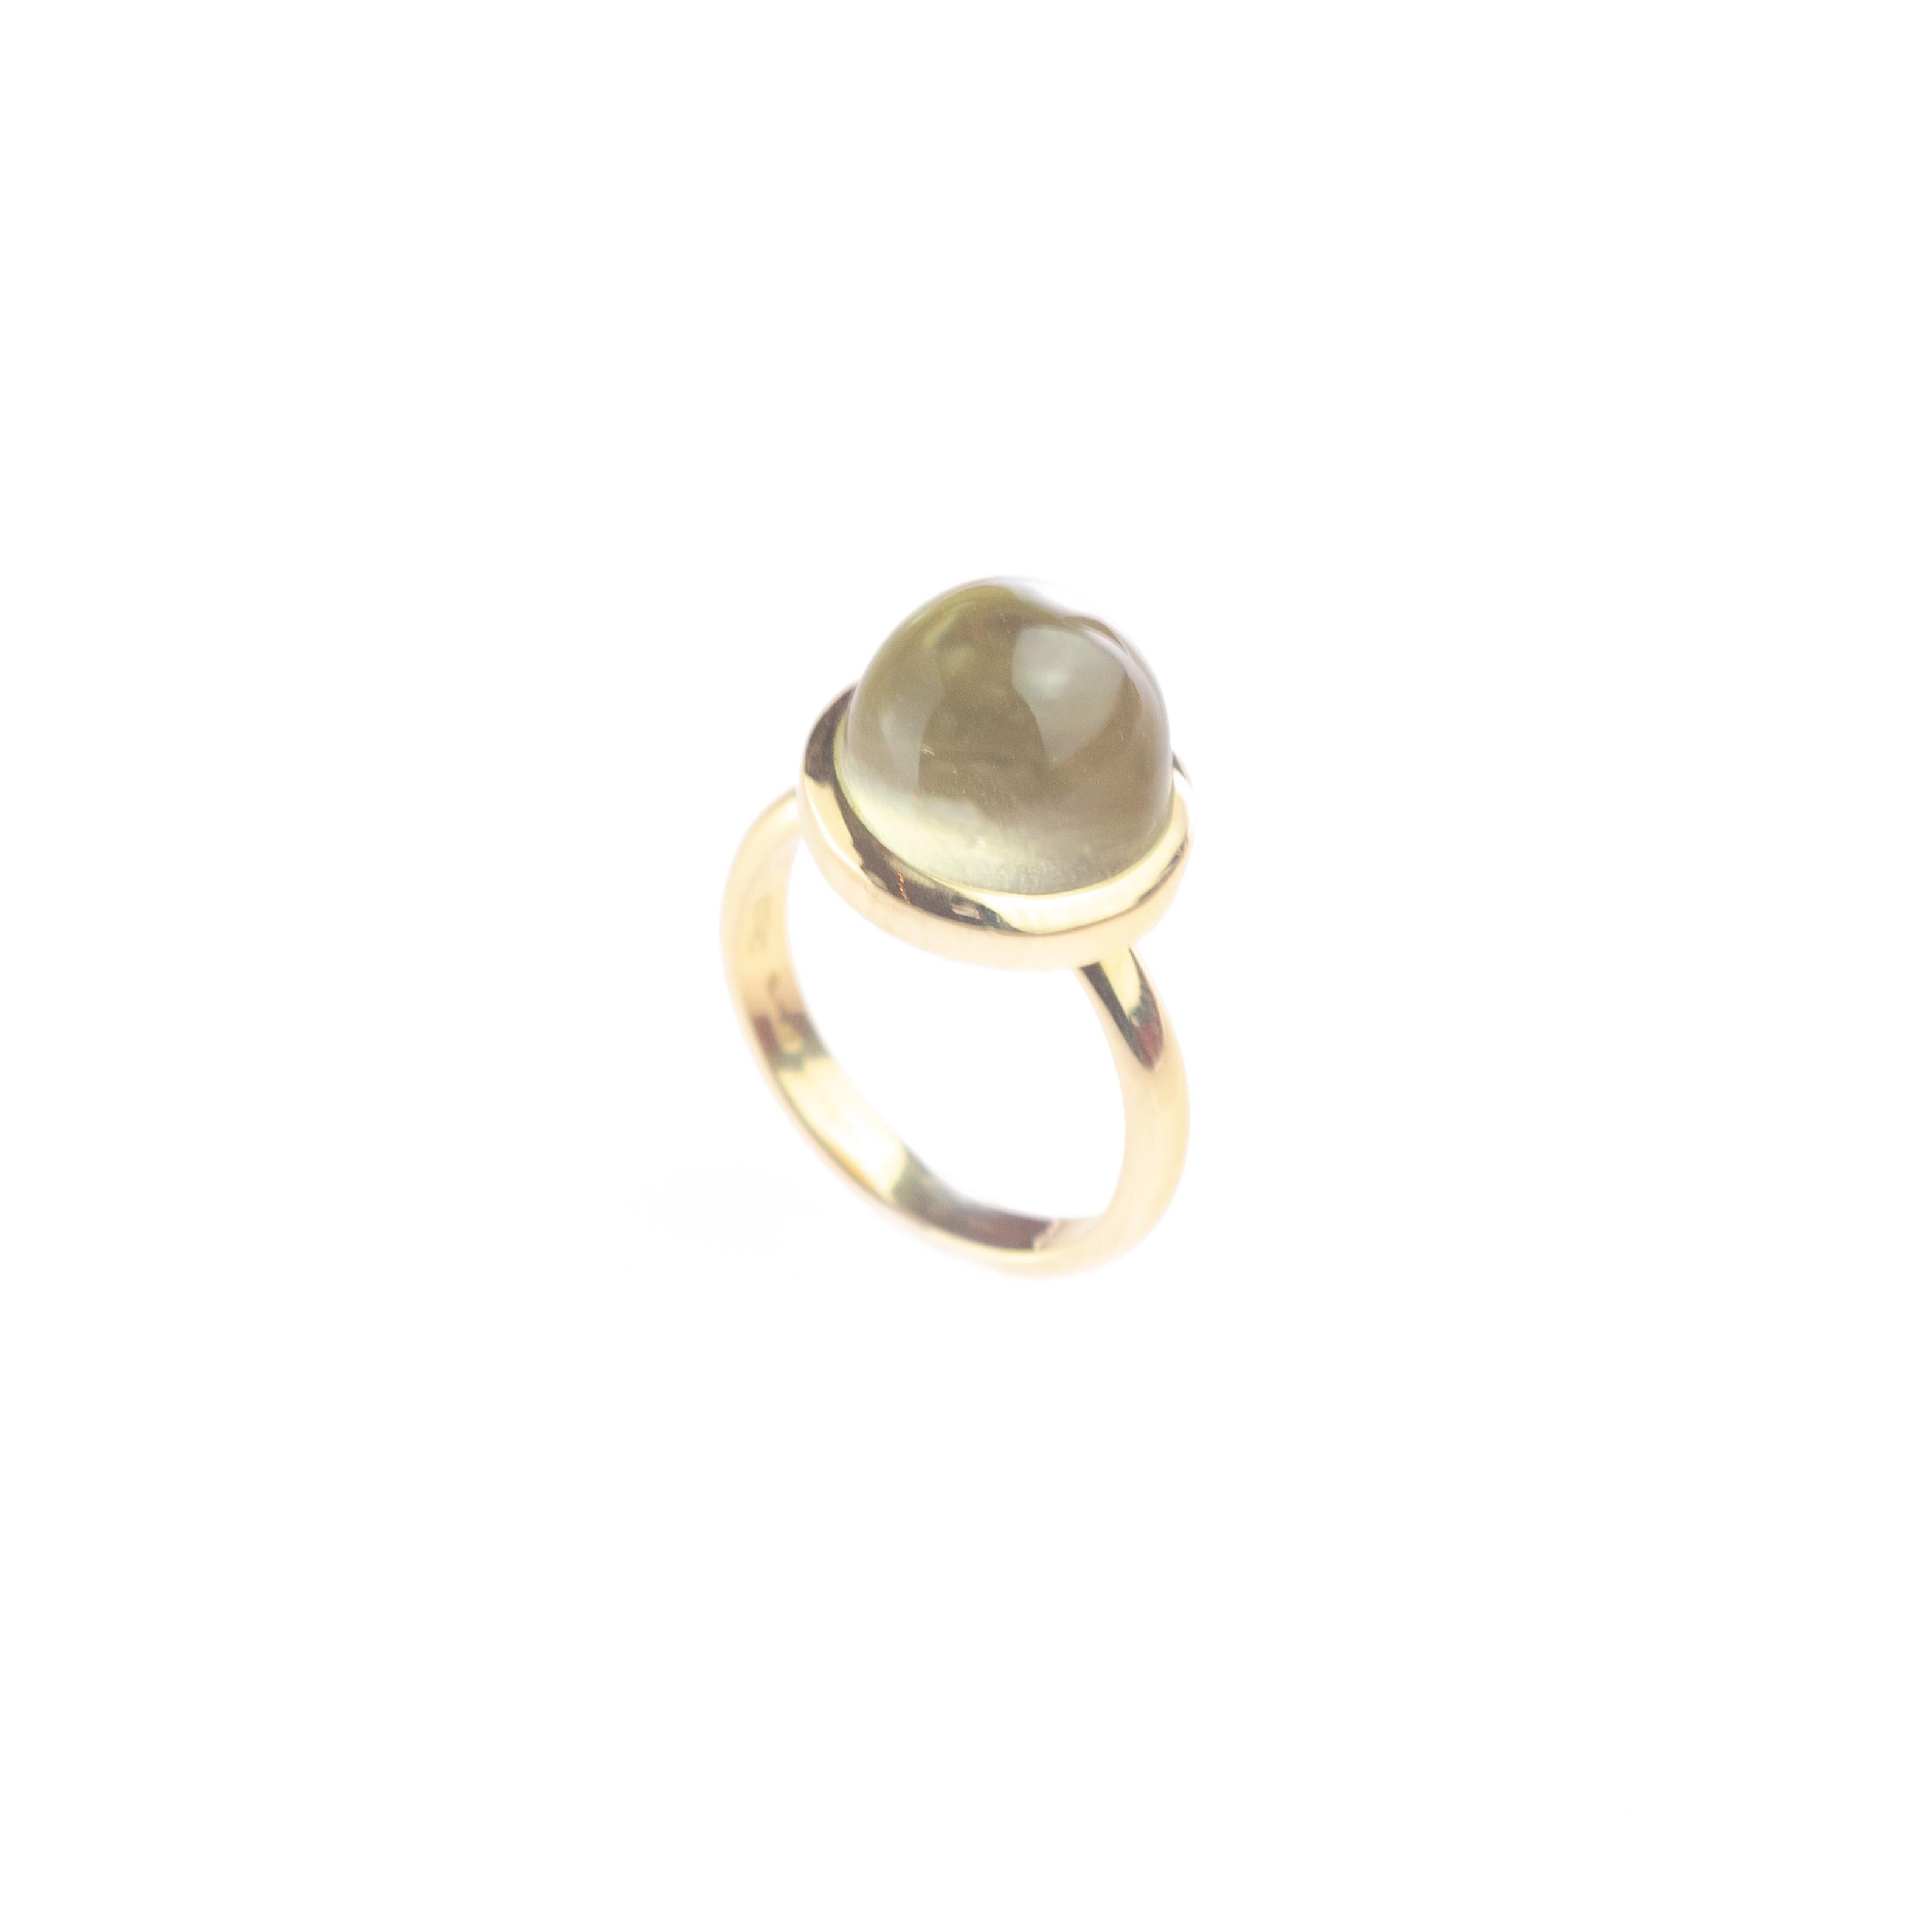 Round Cut Rock Crystal Sphere Stepped Cabochon 18 Karat Yellow Gold Artisan Cocktail Ring